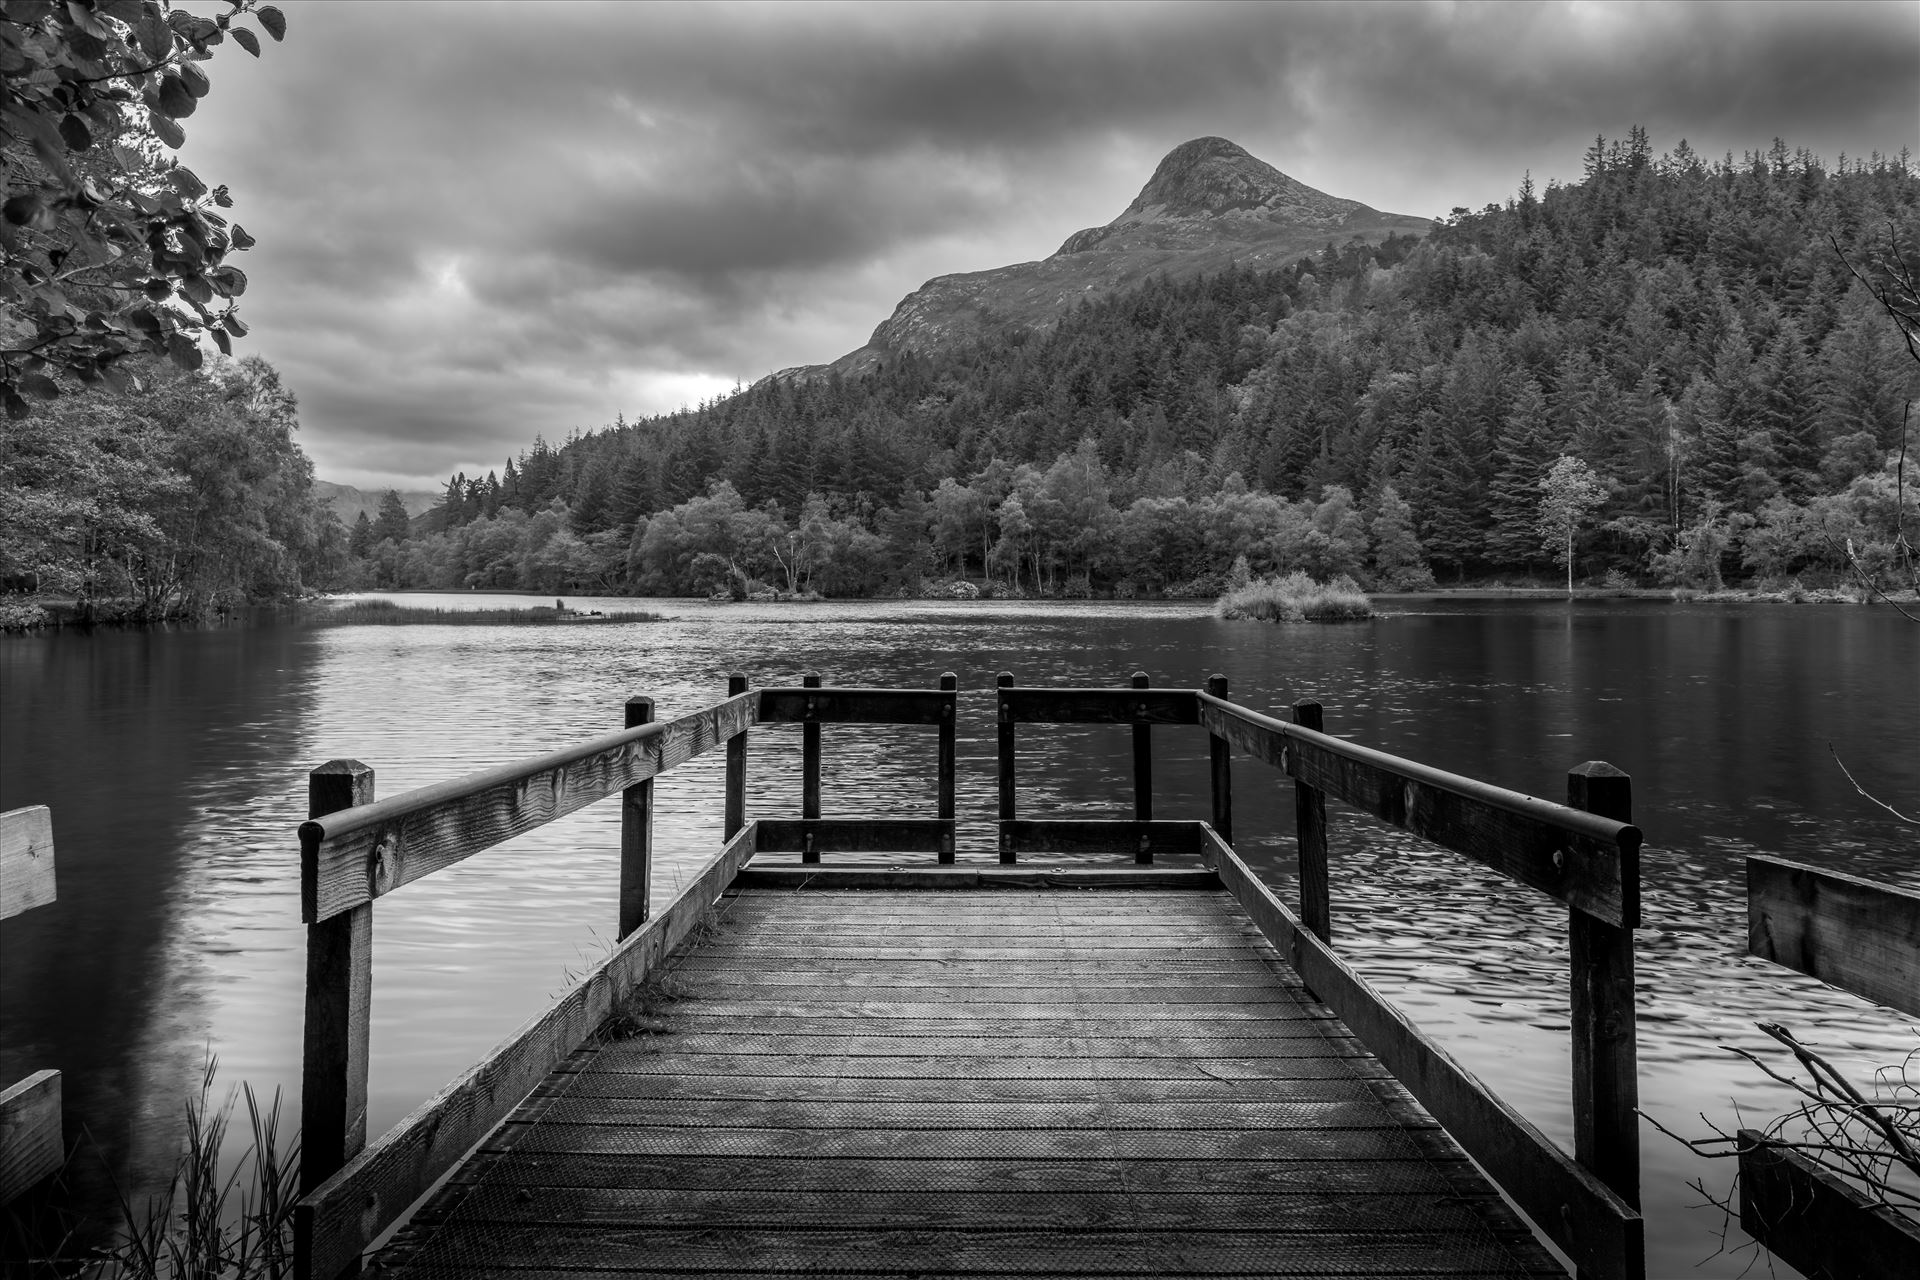 Glencoe Lochan - Glencoe Lochan is a tract of forest located just north of Glencoe village in the Scottish Highlands by philreay